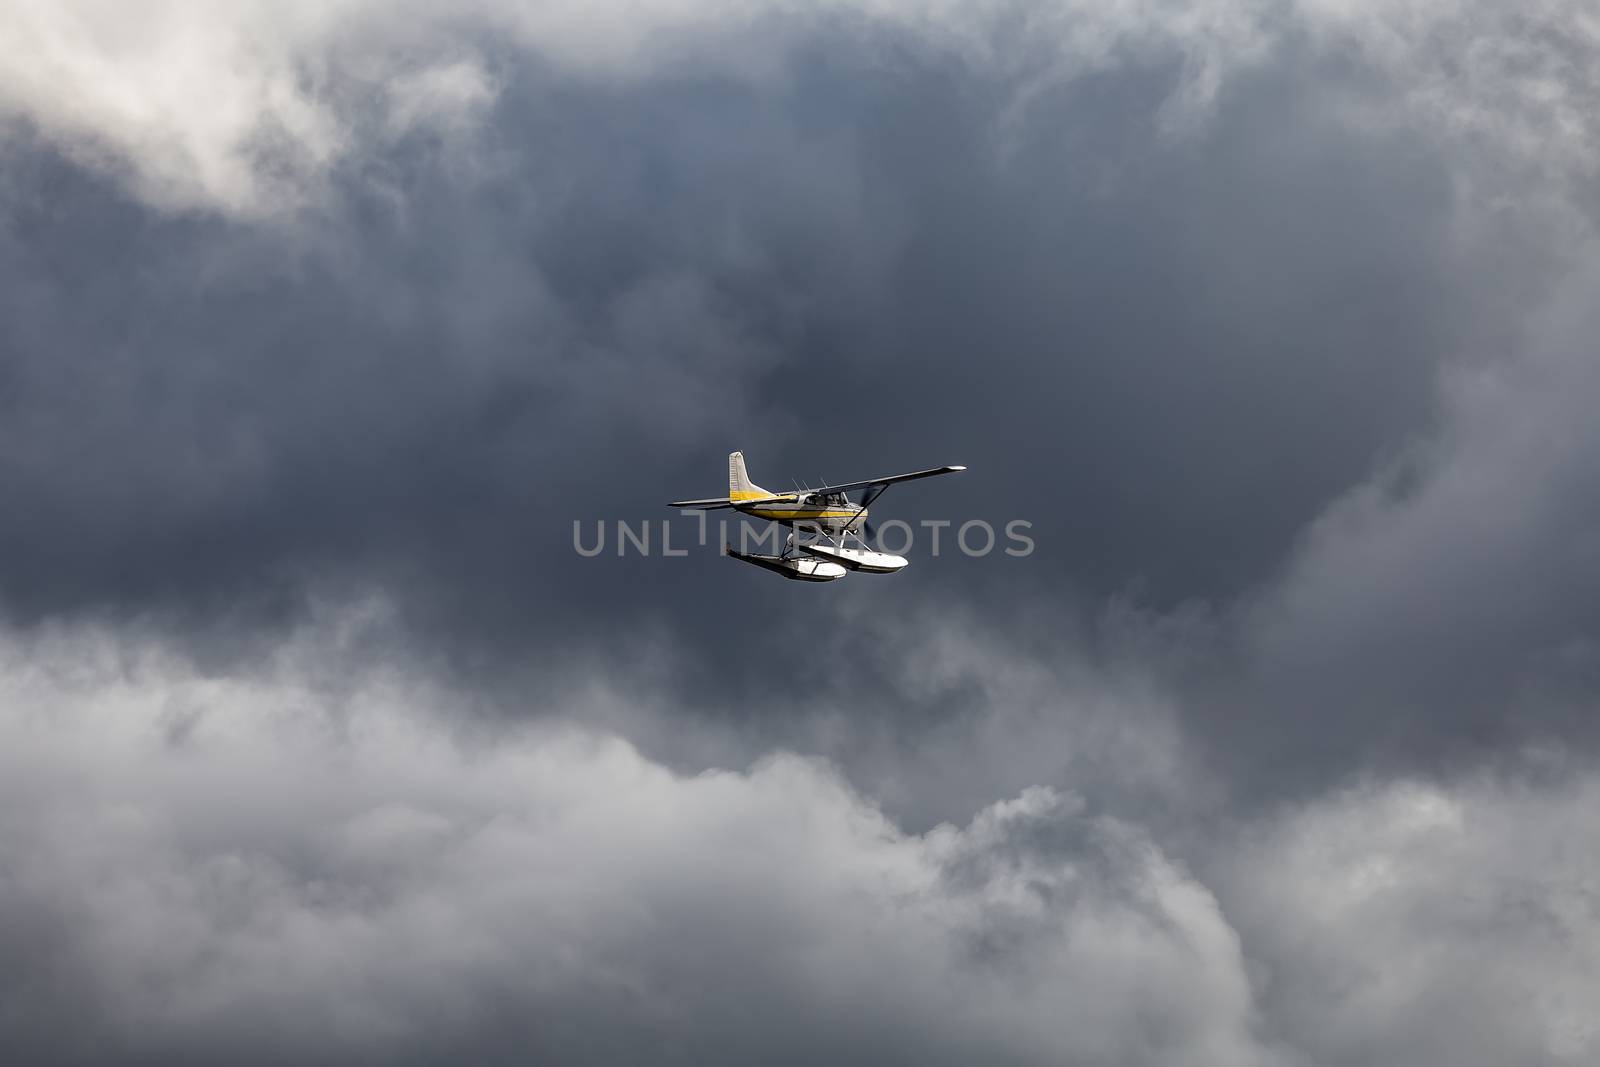 Plane flying towards a storm. Dark clouds as a background.